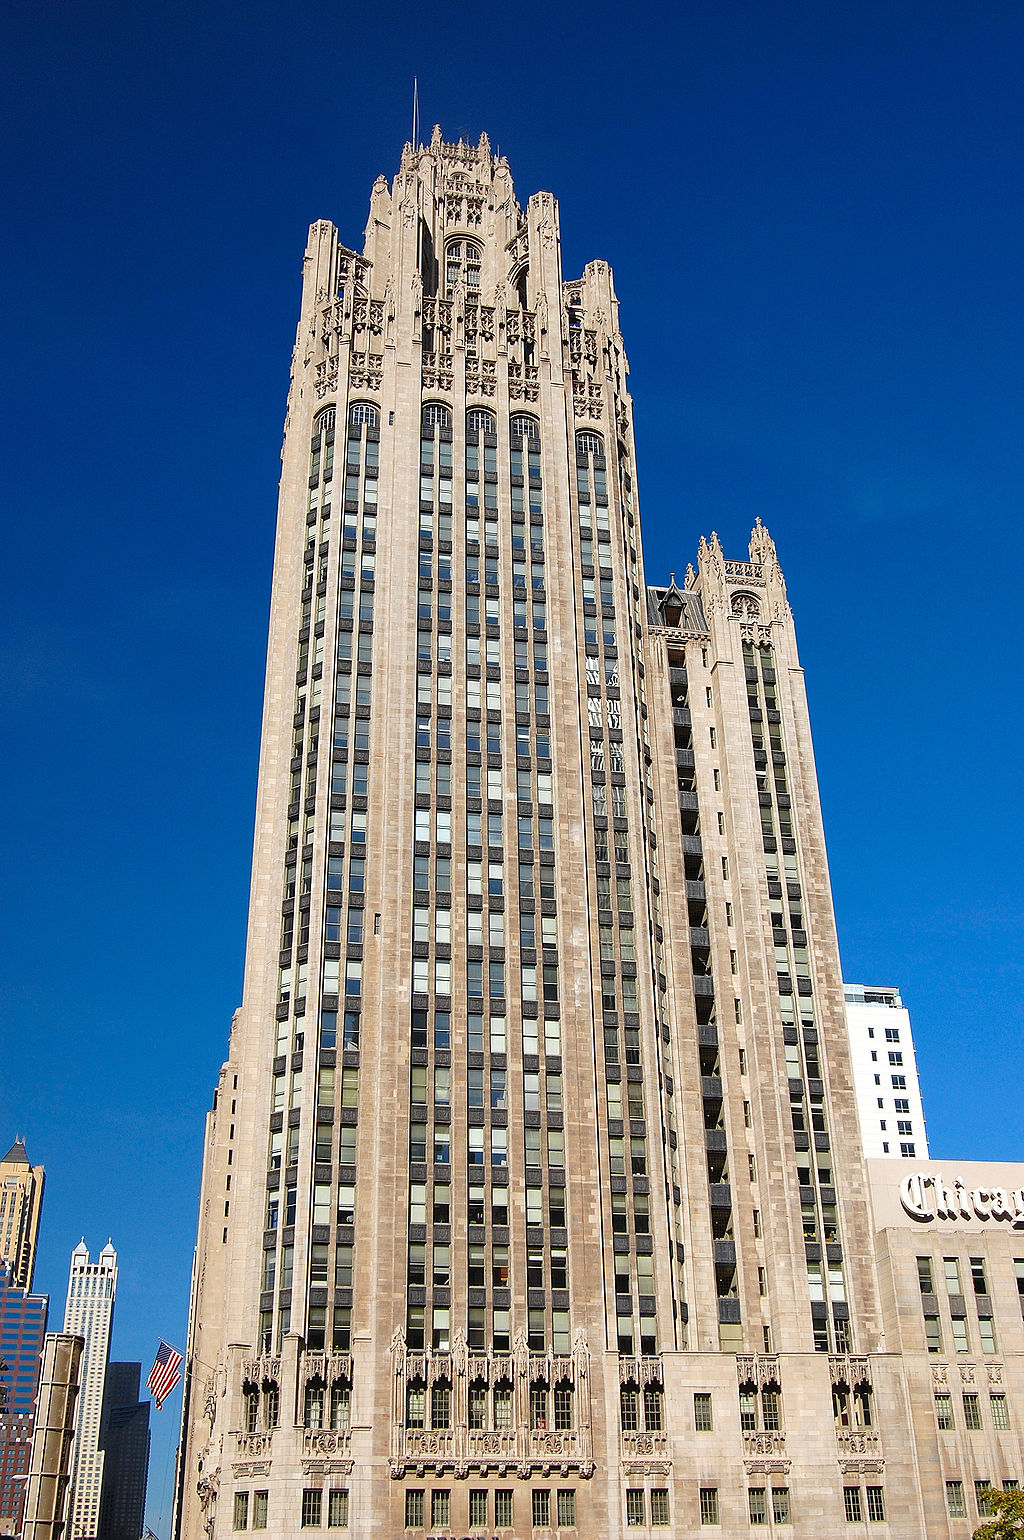 Tribune Tower in Chicago © Luke Gordon - licence [CC BY 2.0] from Wikimedia Commons